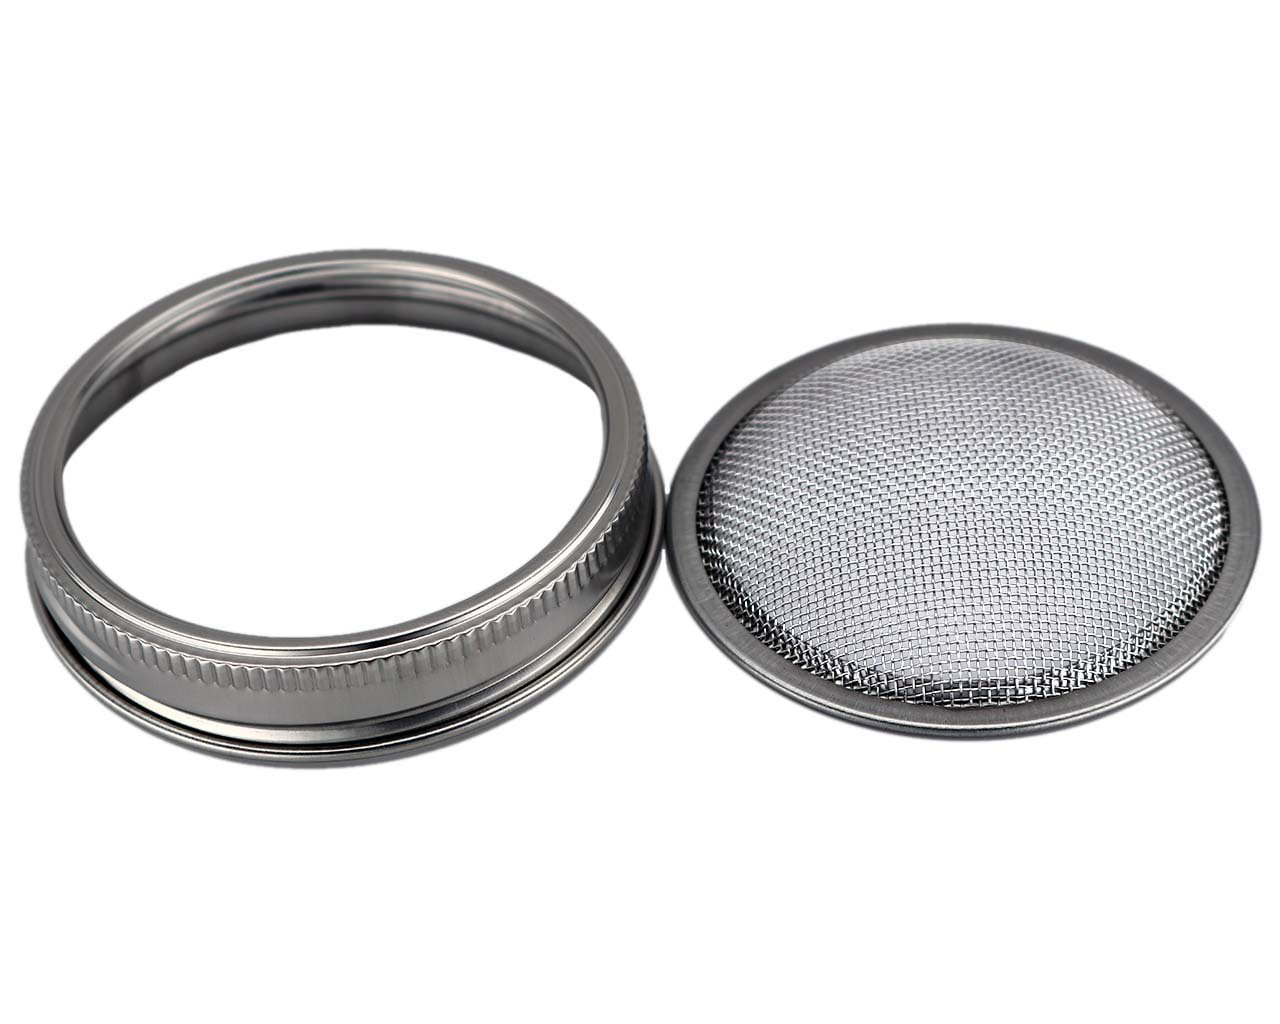 2 Pcs Stainless Steel Sprouting Jar Lids with 2 Pcs Stainless Steel Sprouting Stands for Regular/Wide Mouth Mason Jar